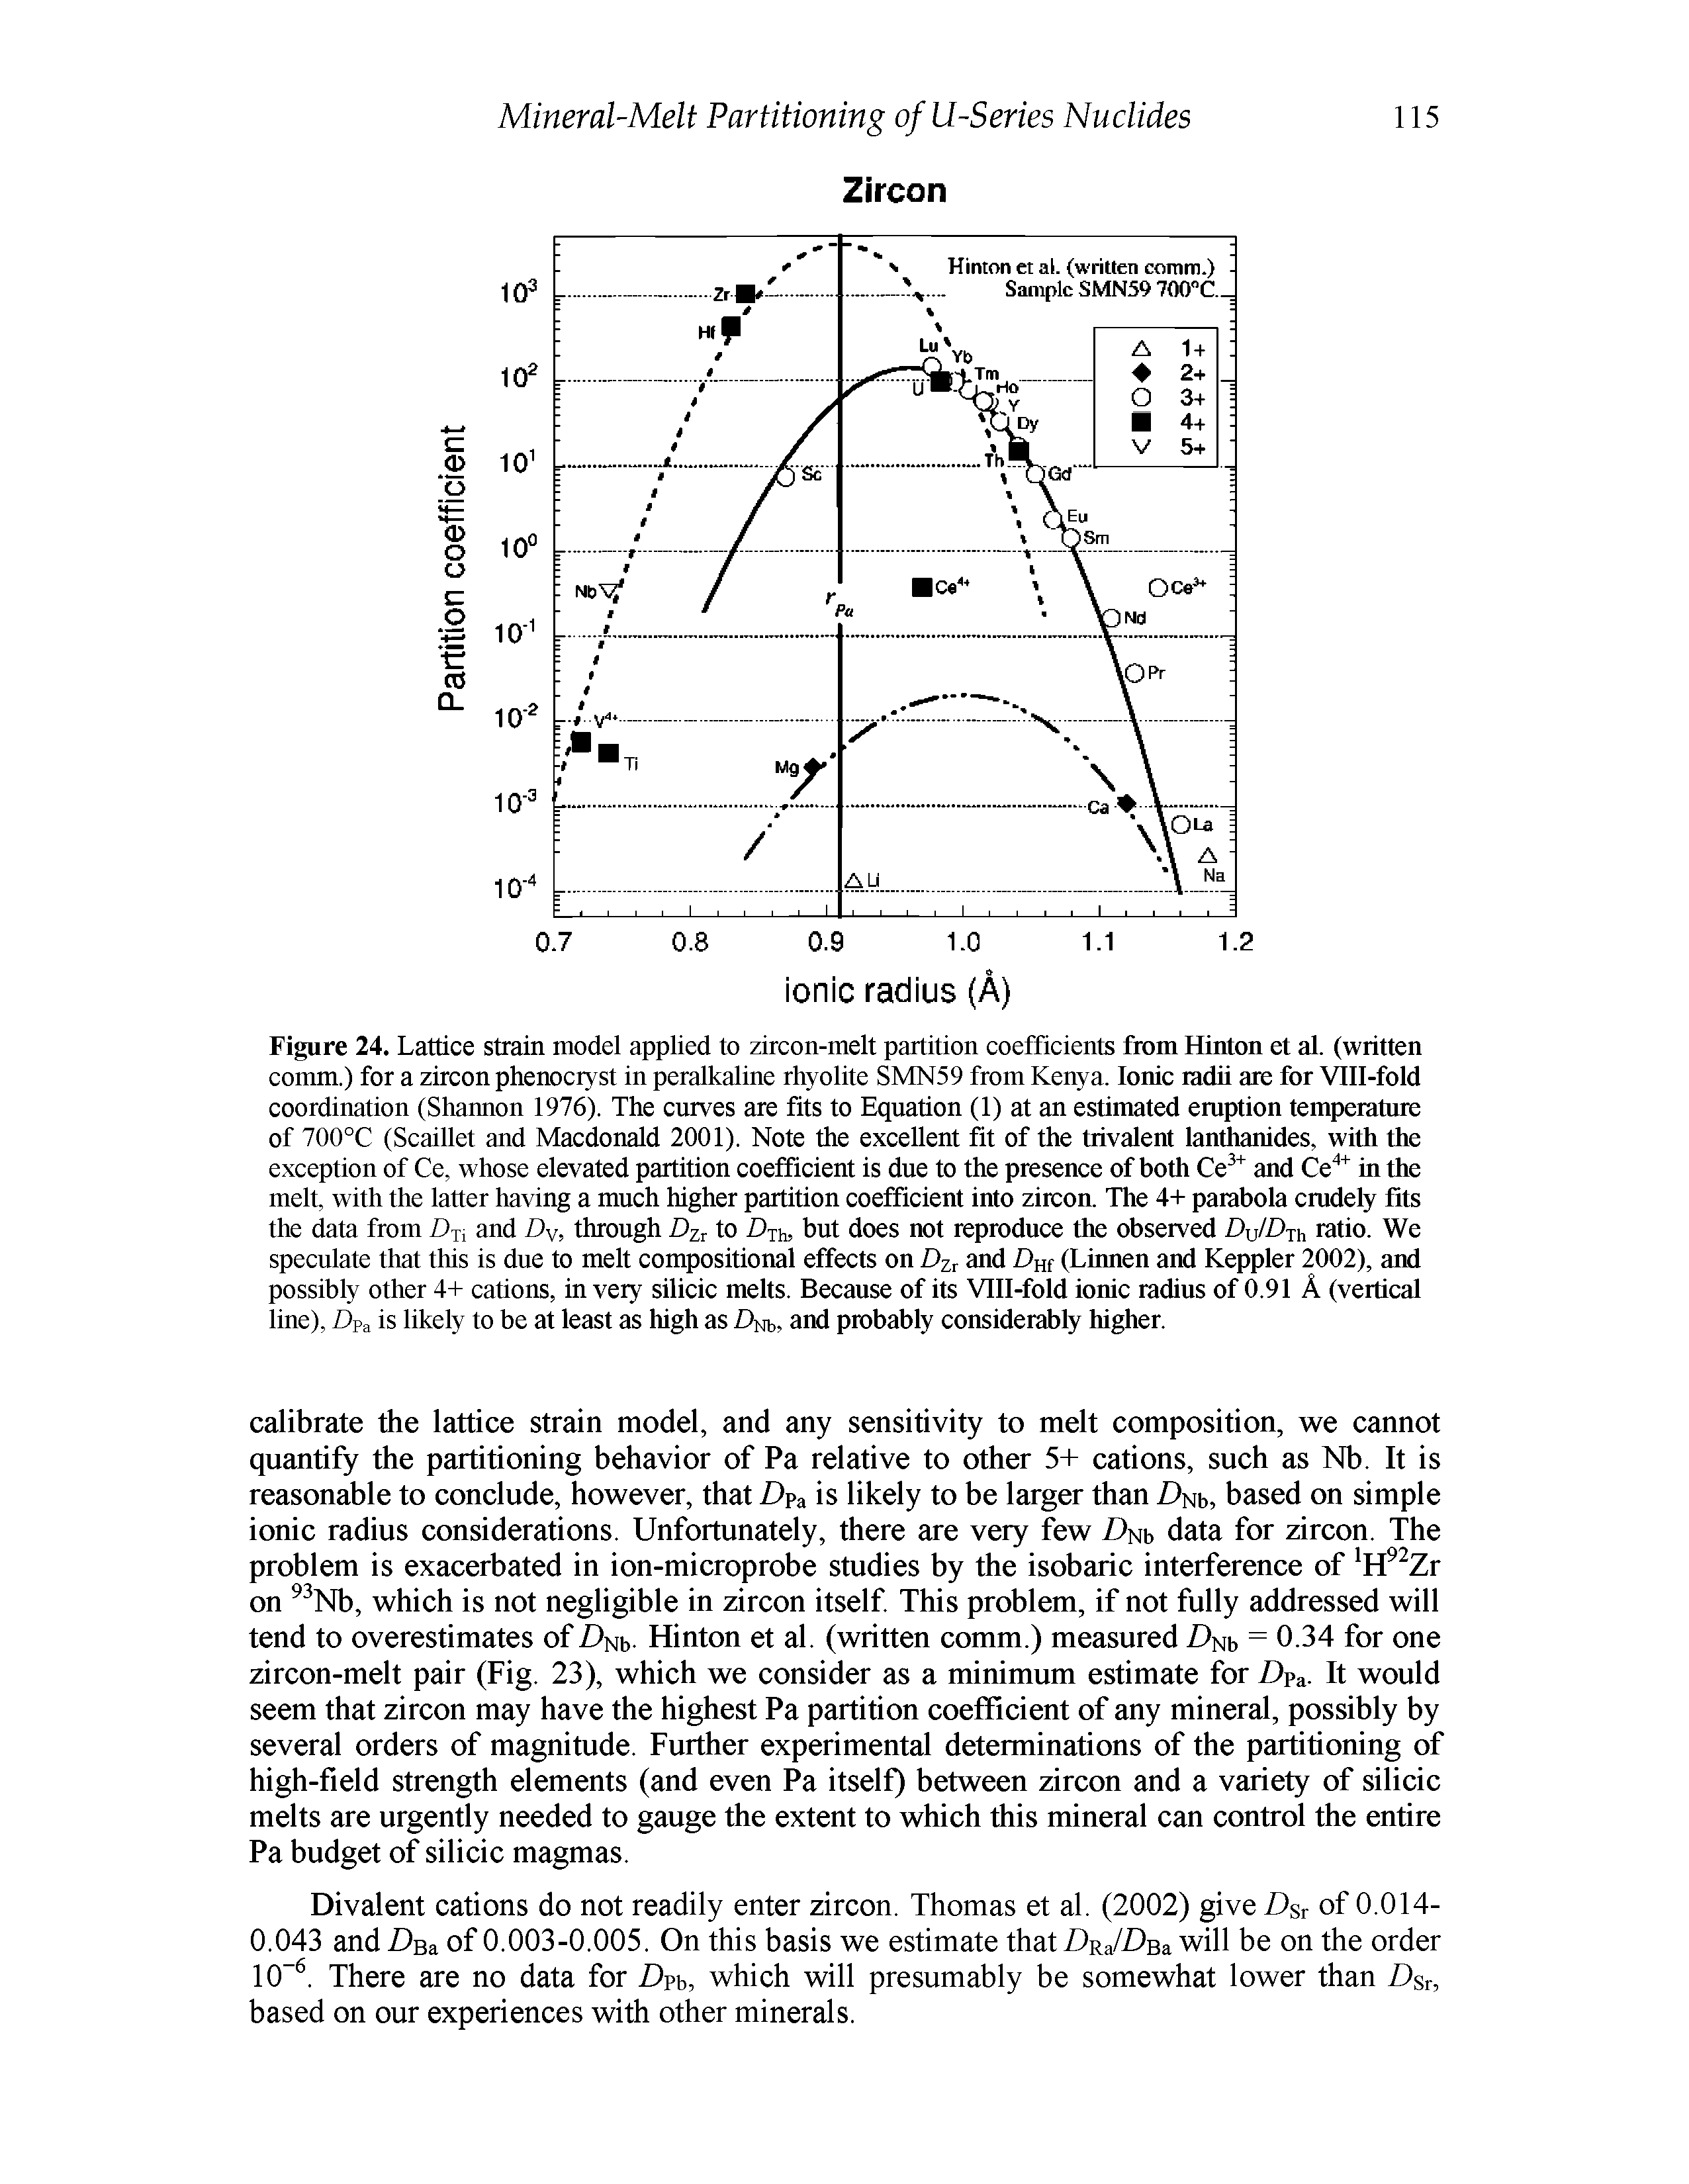 Figure 24. Lattice strain model applied to zircon-melt partition coefficients from Hinton et al. (written comm.) for a zircon phenocryst in peralkaline rhyolite SMN59 from Kenya. Ionic radii are for Vlll-fold coordination (Shannon 1976). The curves are fits to Equation (1) at an estimated eraption temperature of 700°C (Scaillet and Macdonald 2001). Note the excellent fit of the trivalent lanAanides, with the exception of Ce, whose elevated partition coefficient is due to the presence of both Ce and Ce" in the melt, with the latter having a much higher partition coefficient into zircon. The 4+ parabola cradely fits the data from Dj, and Dy, through Dzi to Dih, but does not reproduce the observed DuIDjh ratio. We speculate that this is due to melt compositional effects on Dzt and (Linnen and Keppler 2002), and possibly other 4+ cations, in very silicic melts. Because of its Vlll-fold ionic radius of 0.91 A (vertical line), Dpa is likely to be at least as high as Dwh, and probably considerably higher.